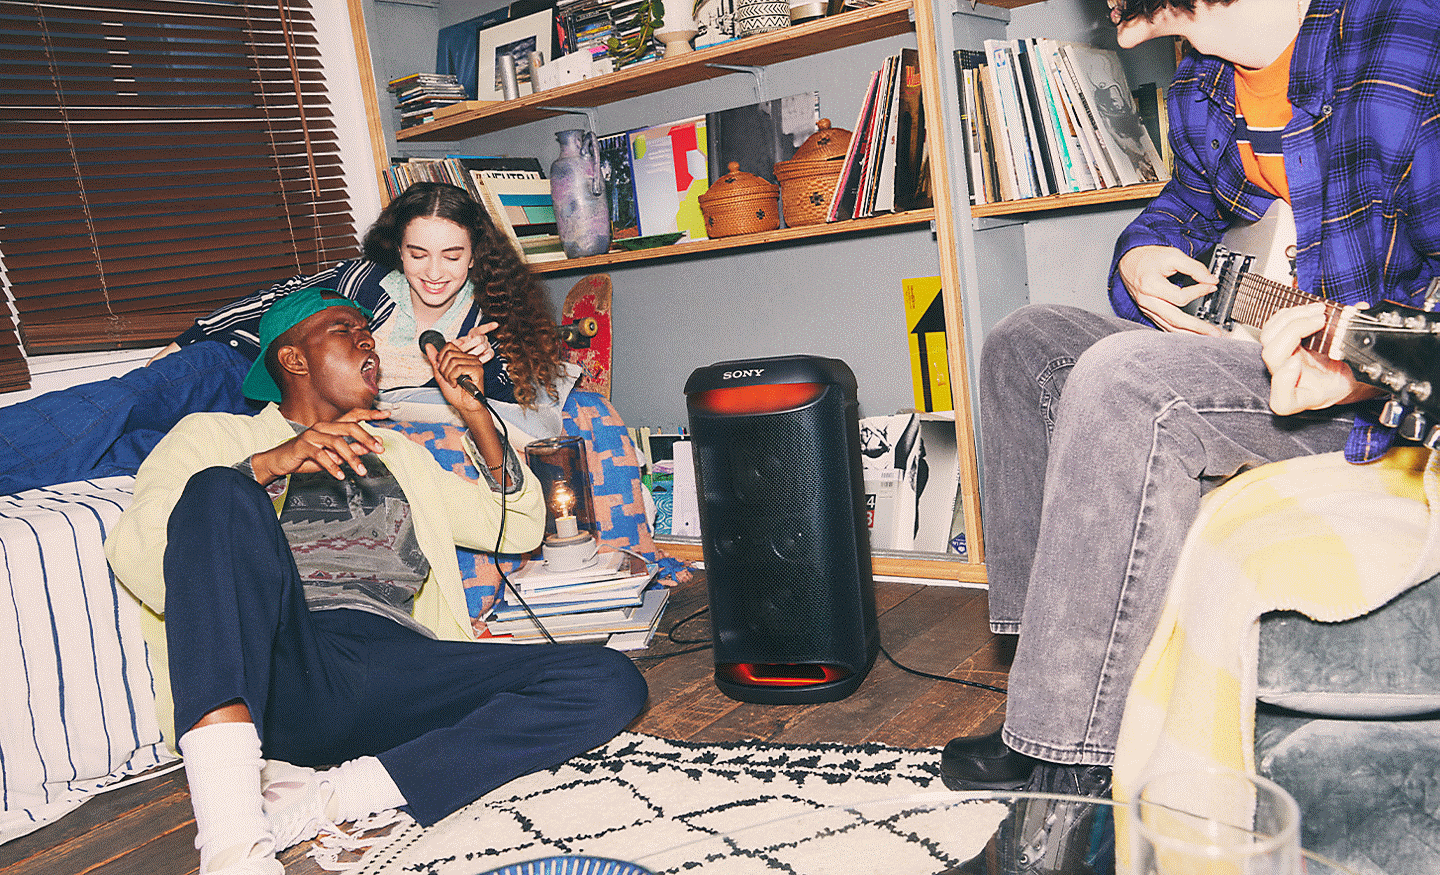 The SRS-XV500 speaker with both a guitar and a microphone plugged in, featuring people singing and playing